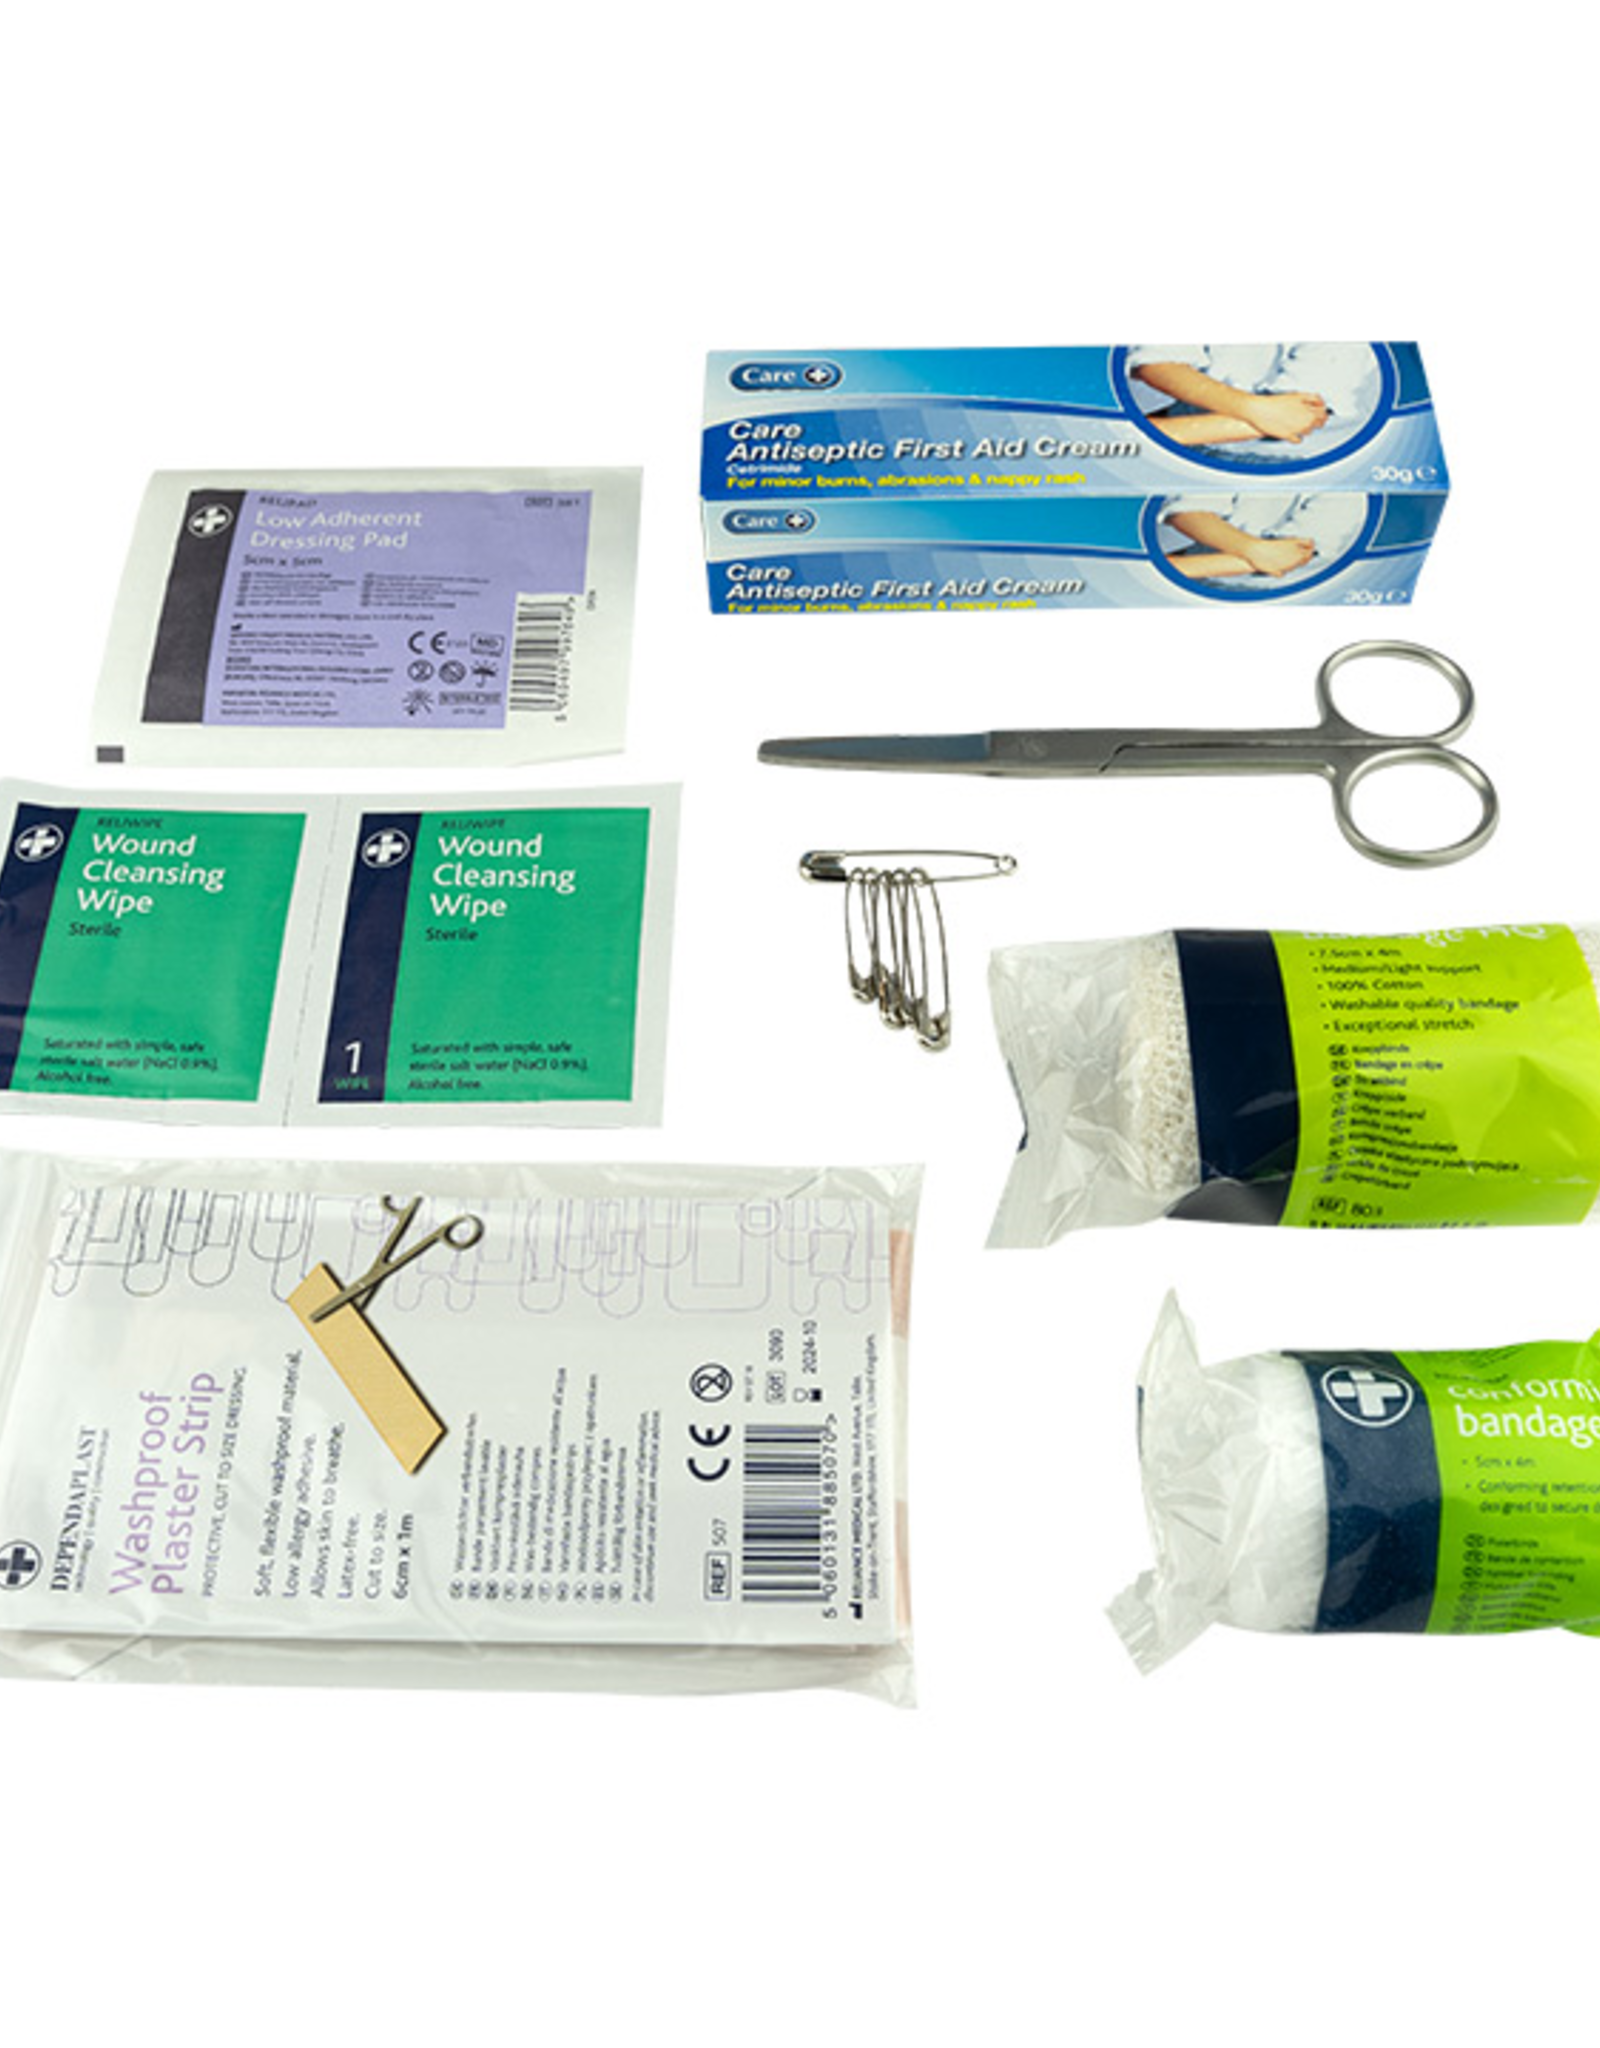 VIPER VP FIRST AID KIT COYOTE